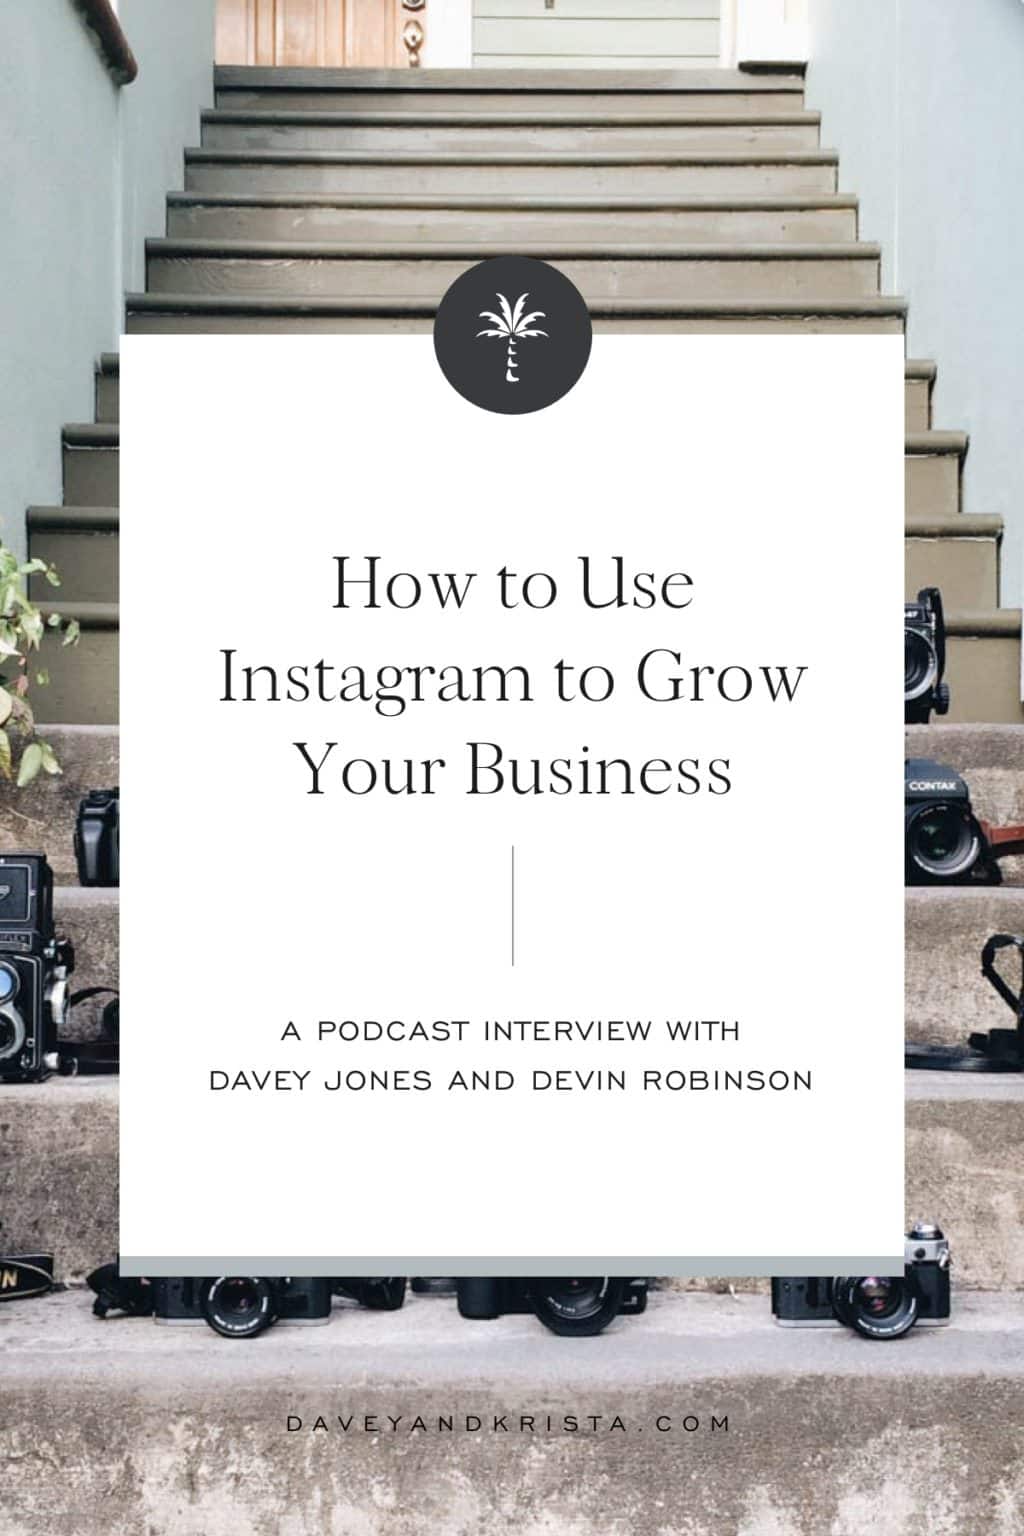 BTB Episode 70: How to Use Instagram to Grow Your Business | Davey & Krista